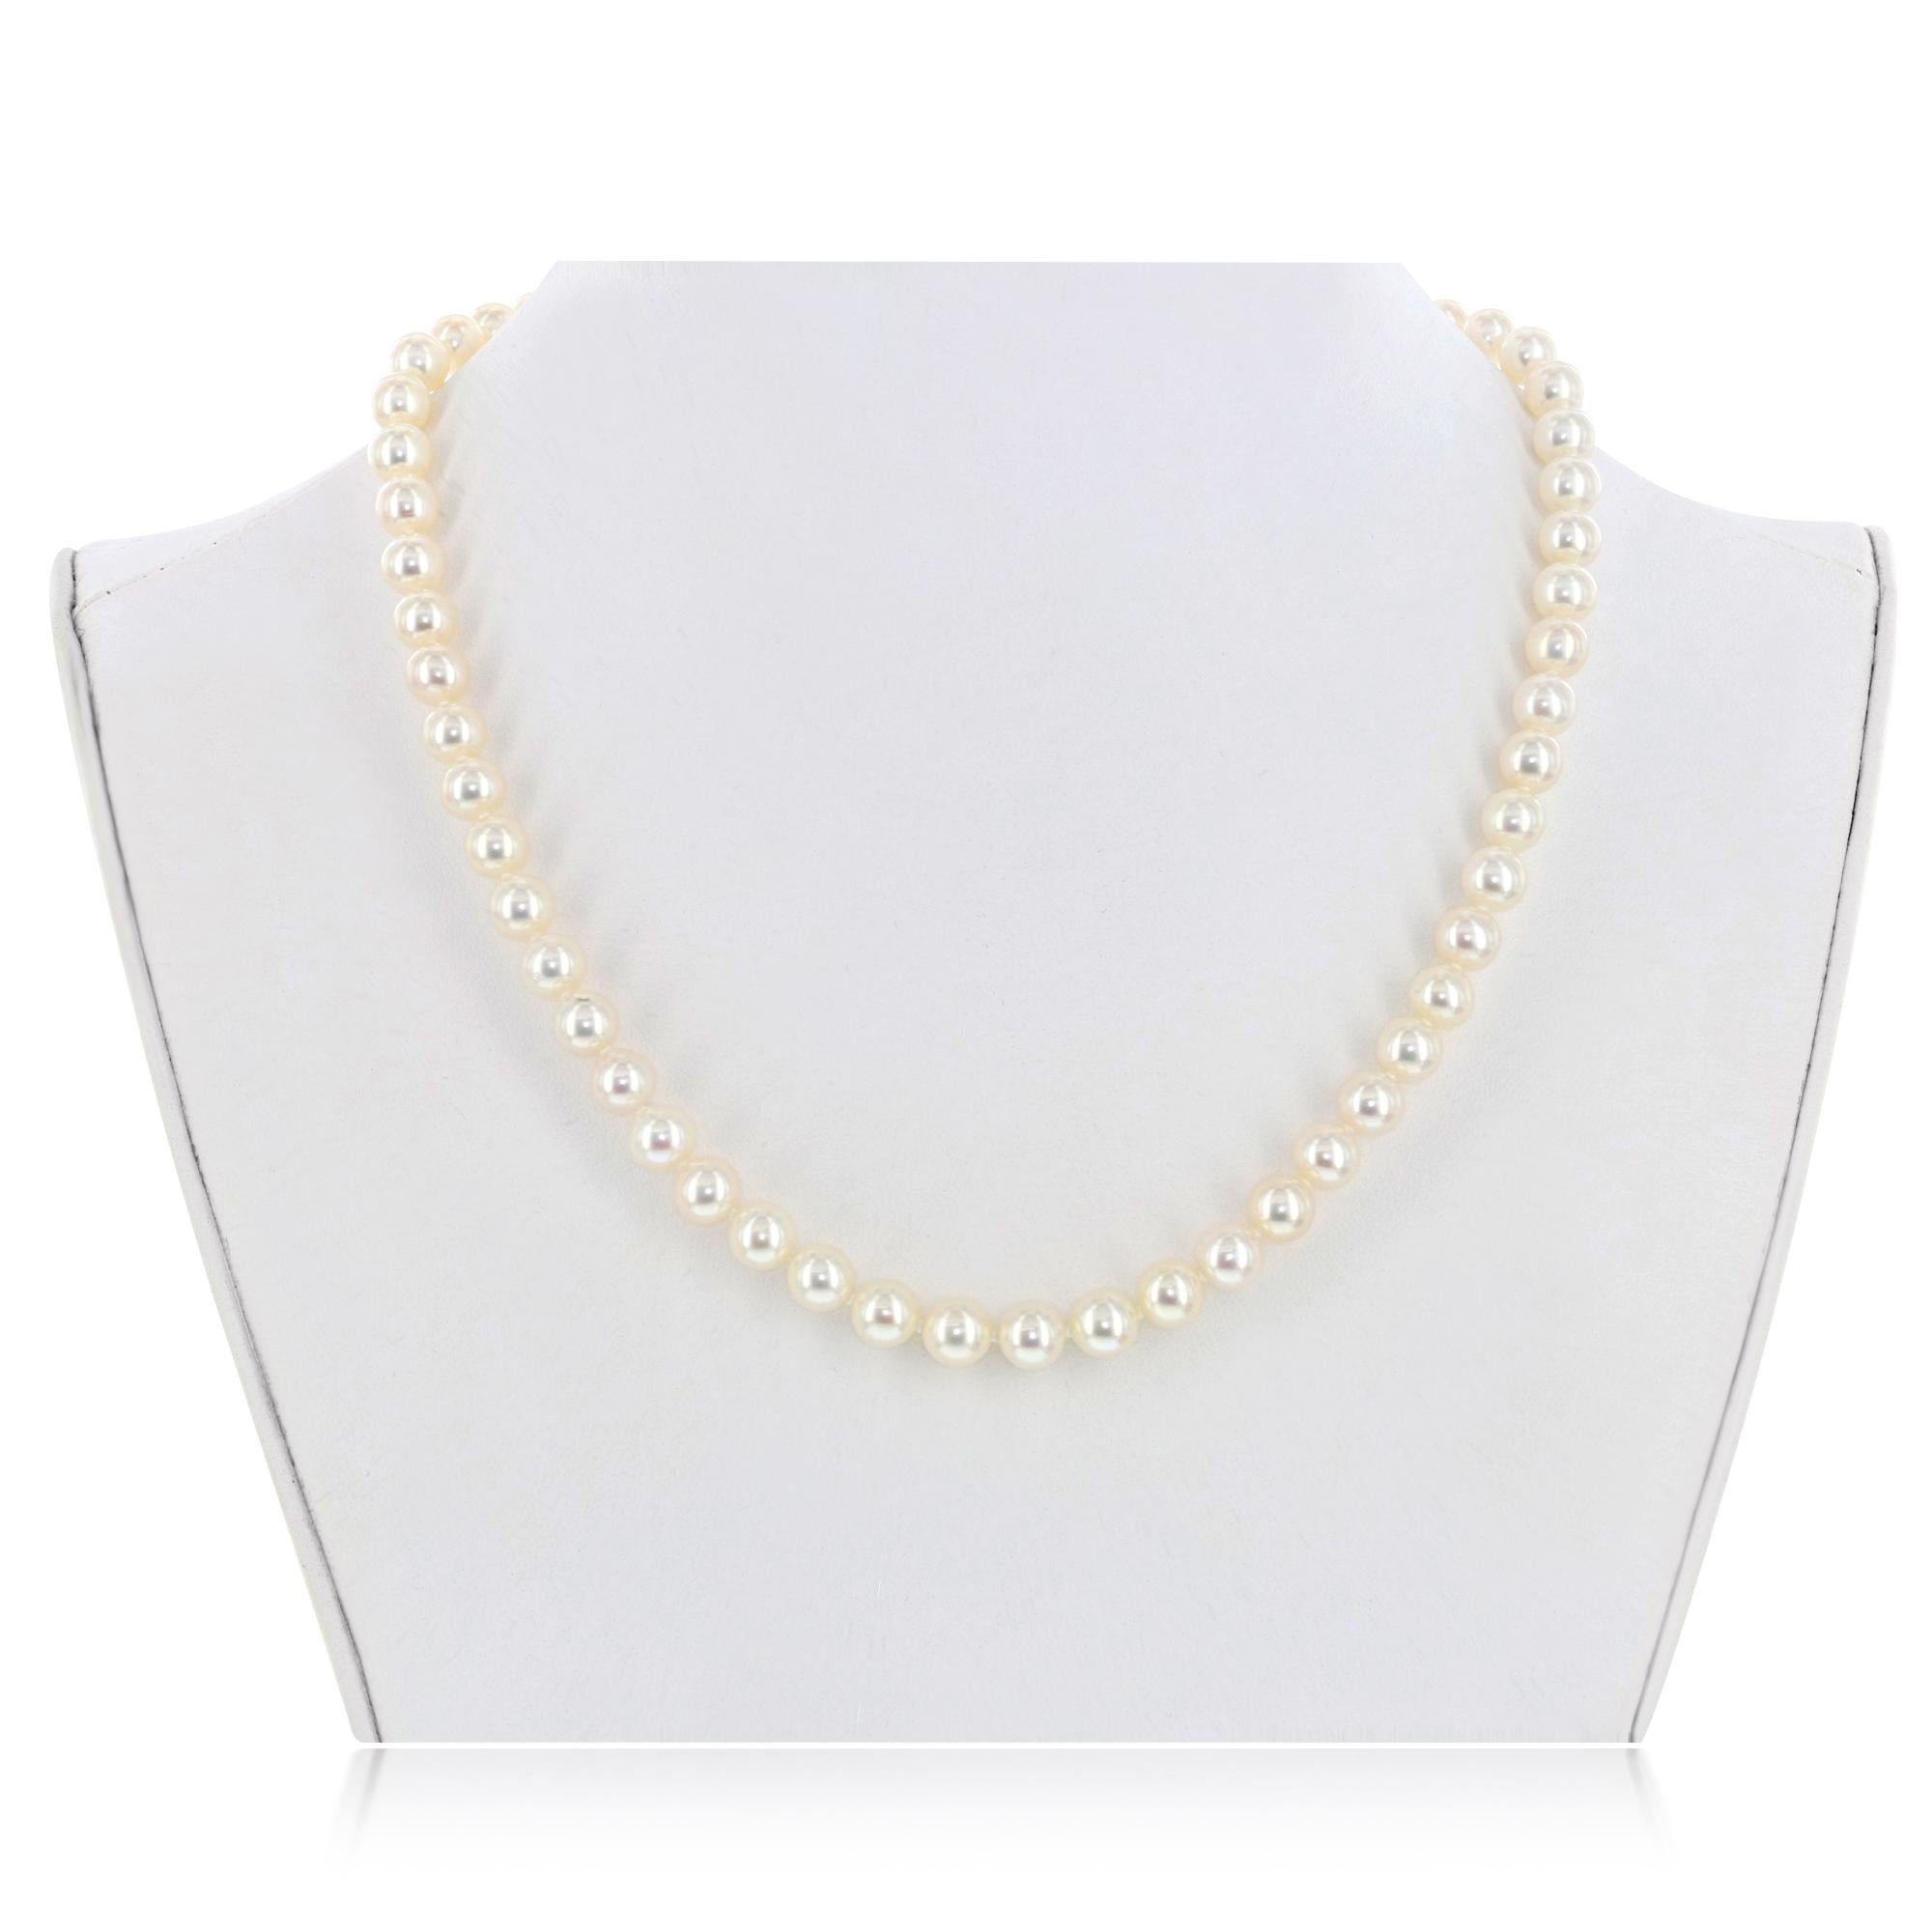 This classic Chinese Freshwater Cultured pearl necklace measures 6-6.5mm. The necklace is strung to 18 inches with a 14 karat gold filigree clasp.